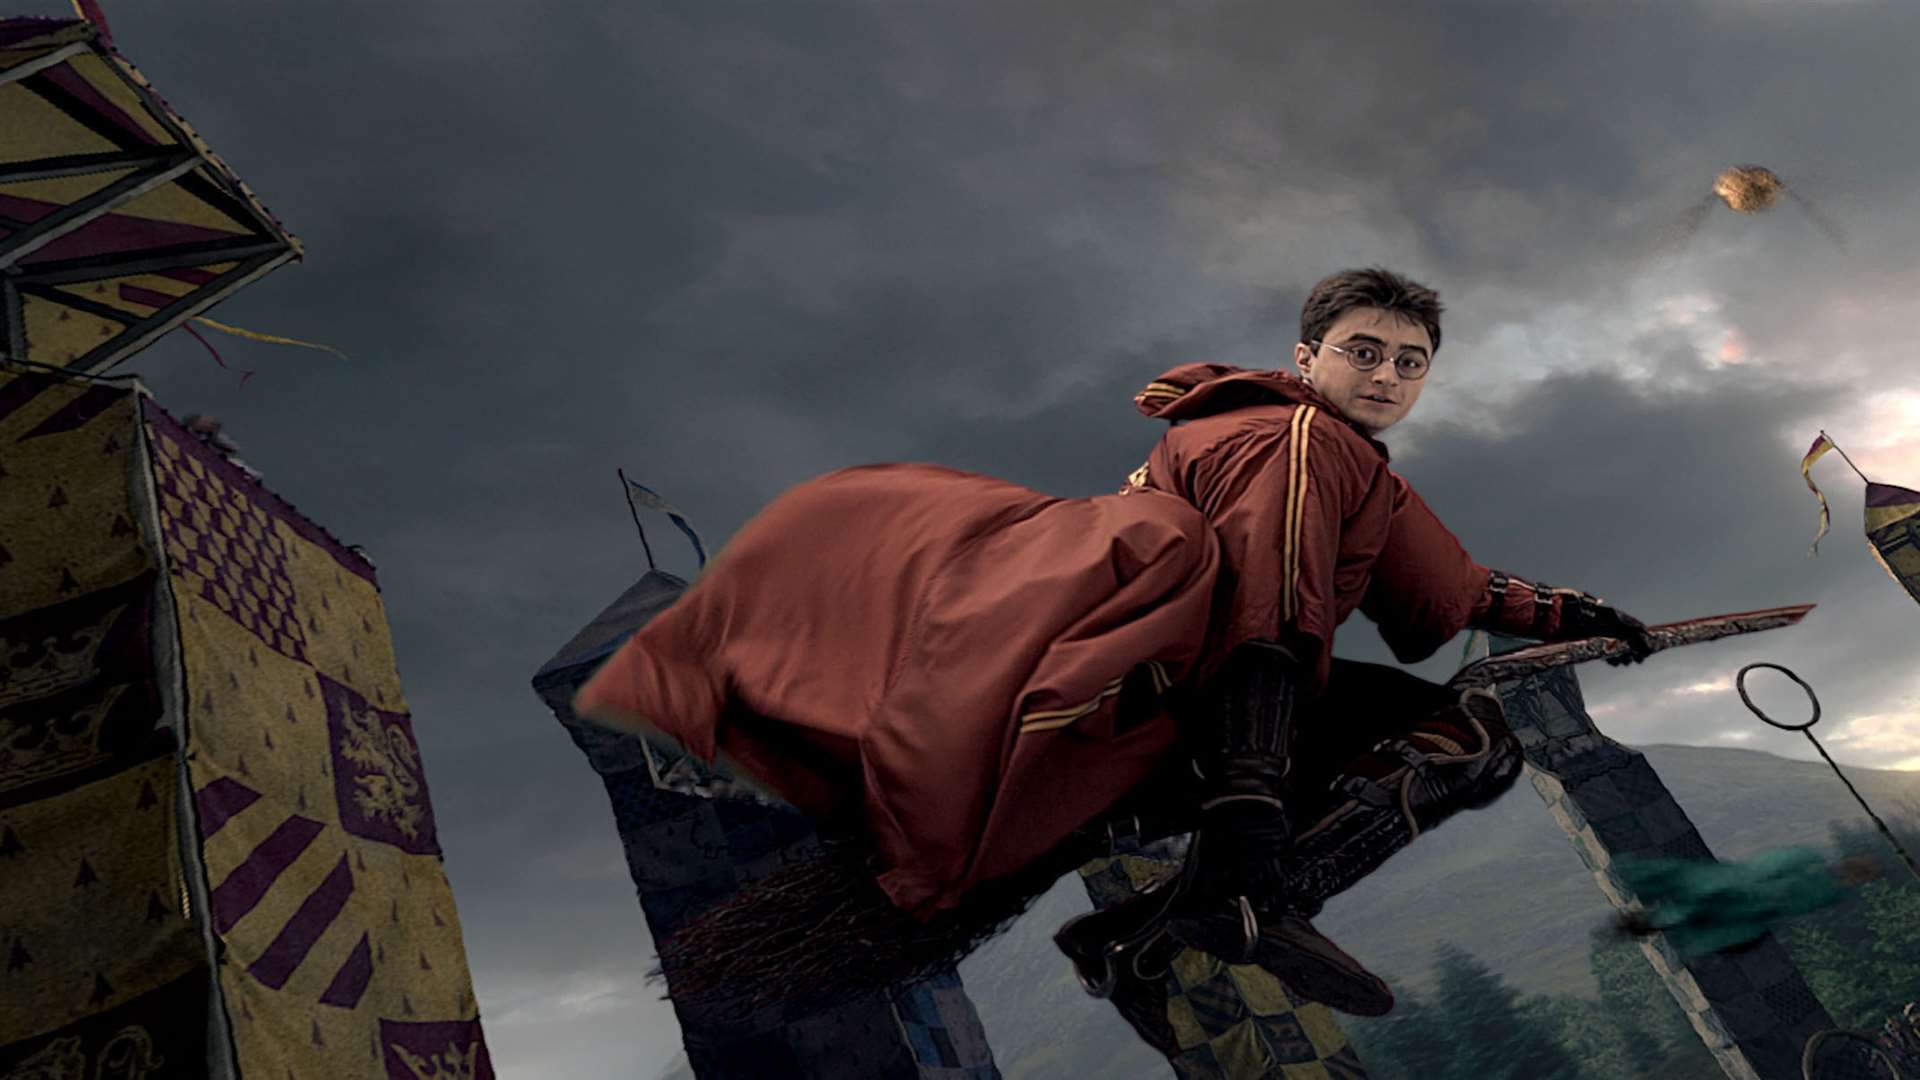 Daniel Radcliffe as Harry Potter takes part in a game of quidditch. Picture: Warner Bros.